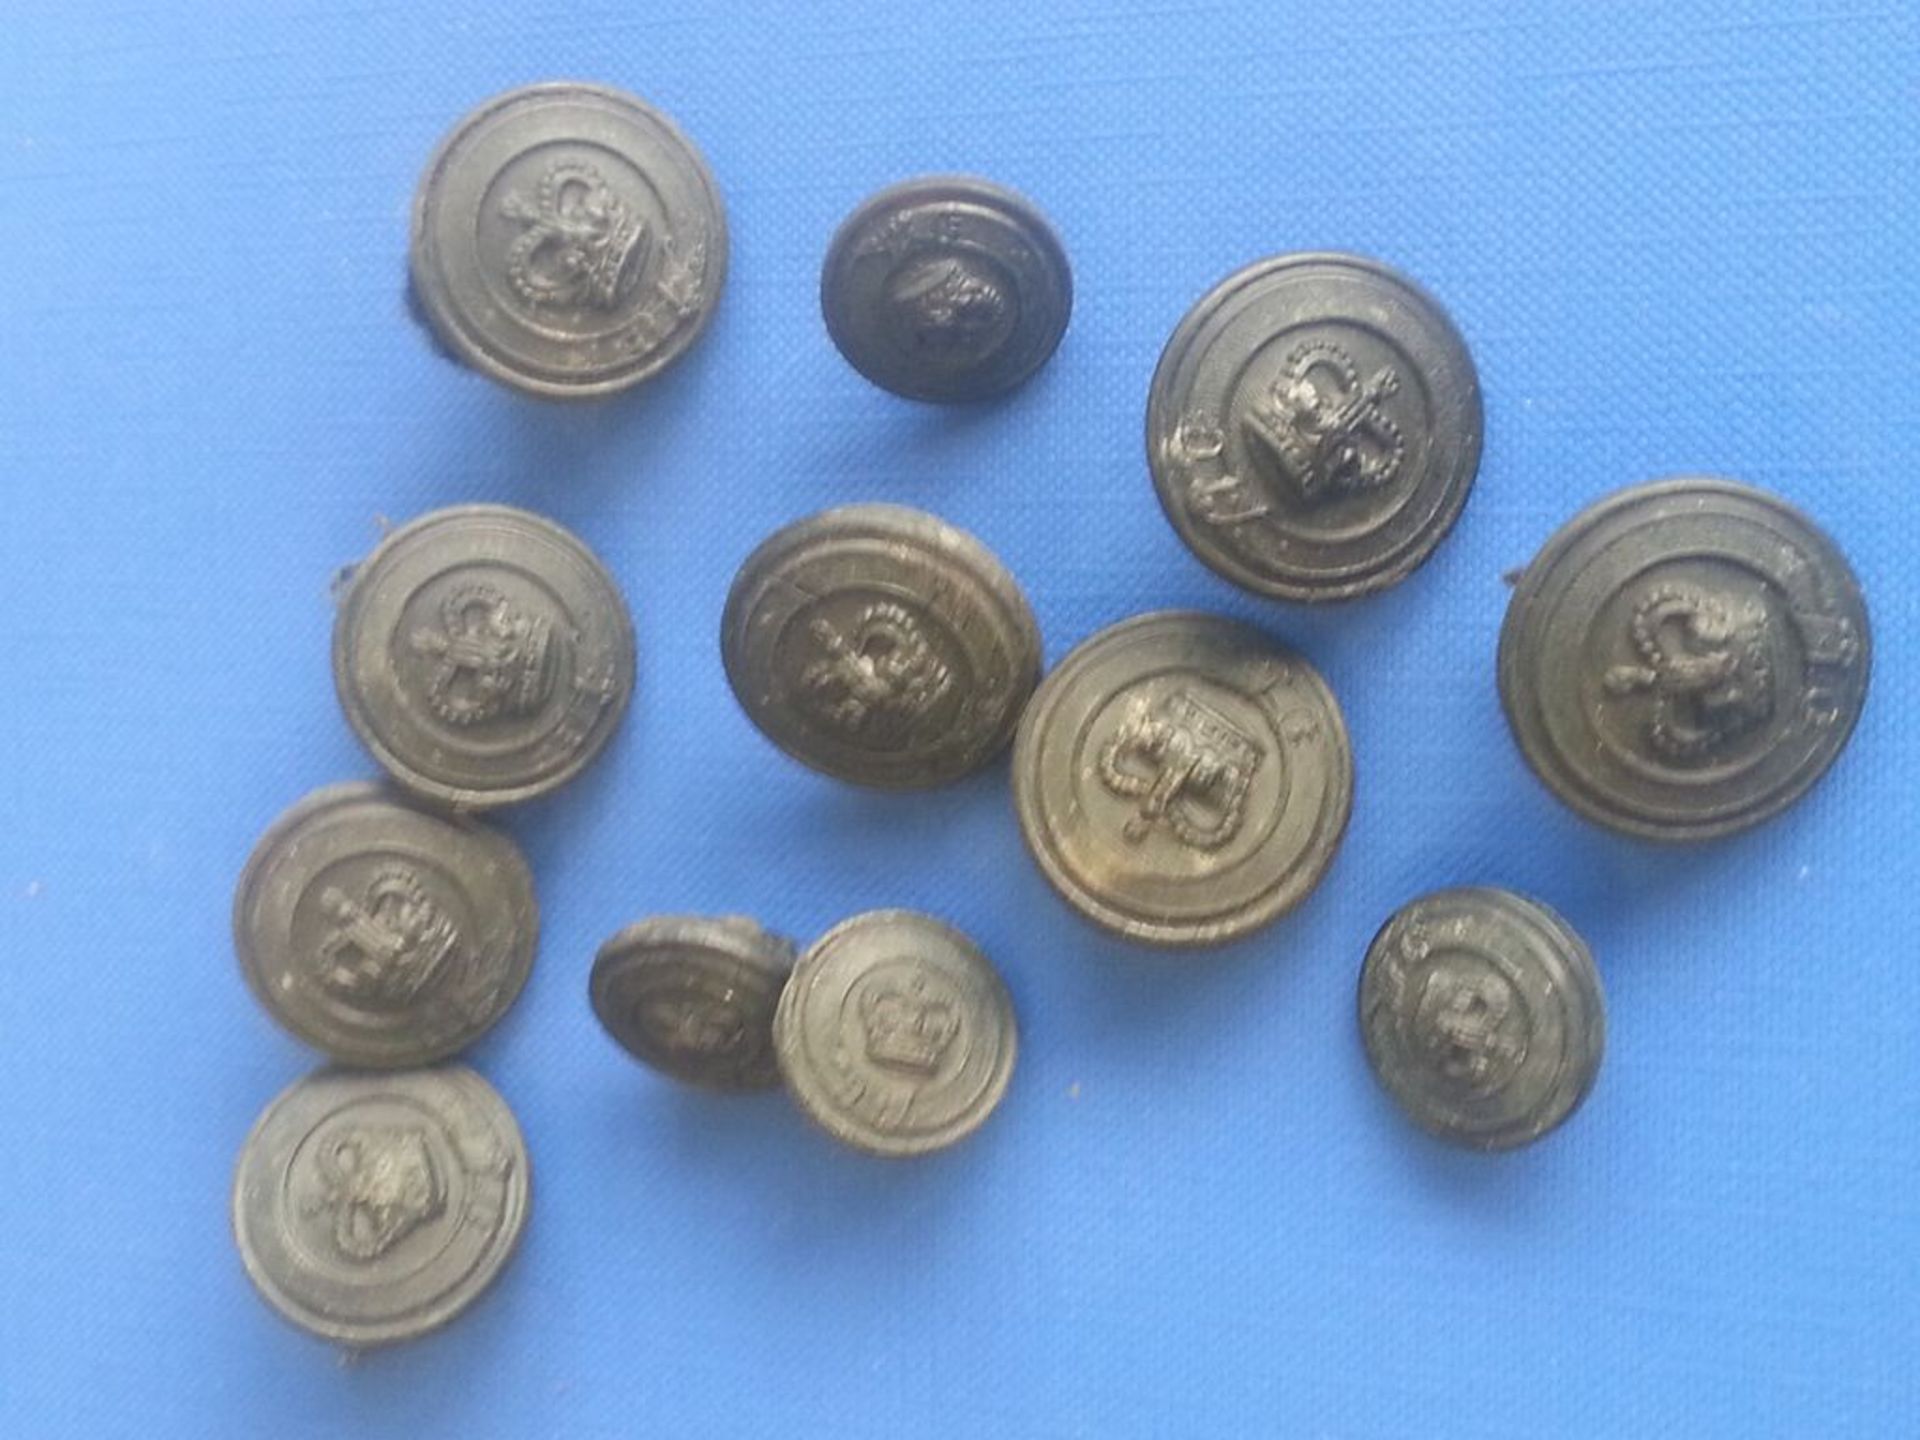 A Set of Vintage Black Plastic British Police Uniform Buttons Made by James Grove & Sons